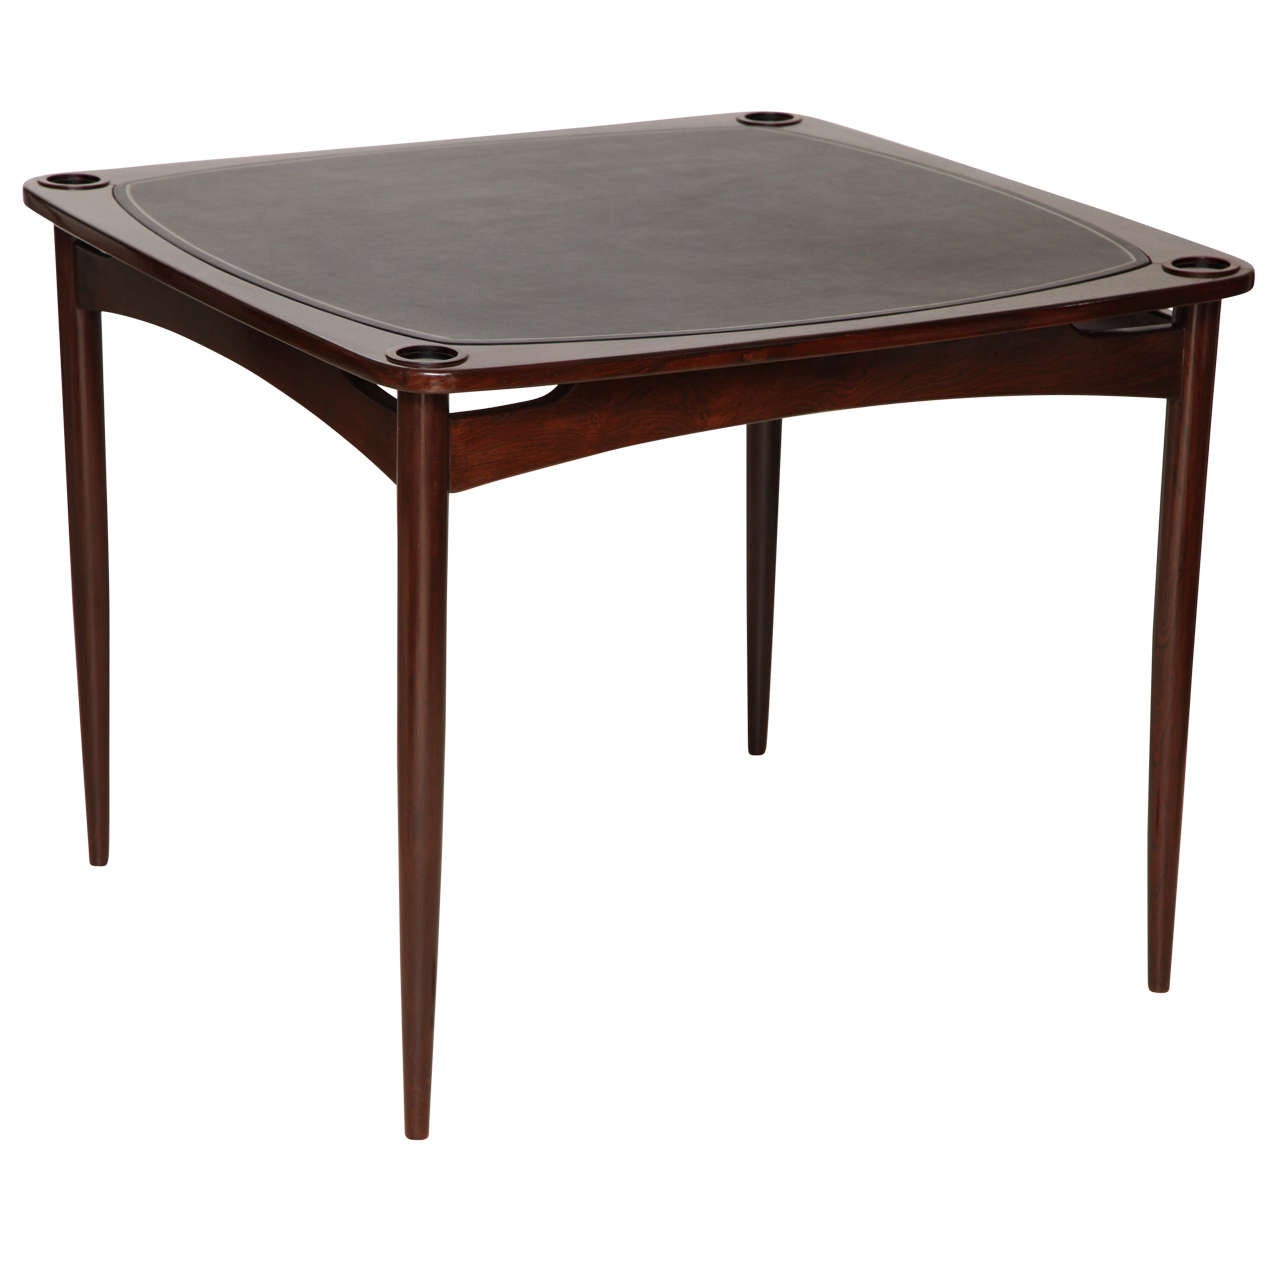 Solid Rosewood Games Table with Leather Top designed by Sergio Rodrigues